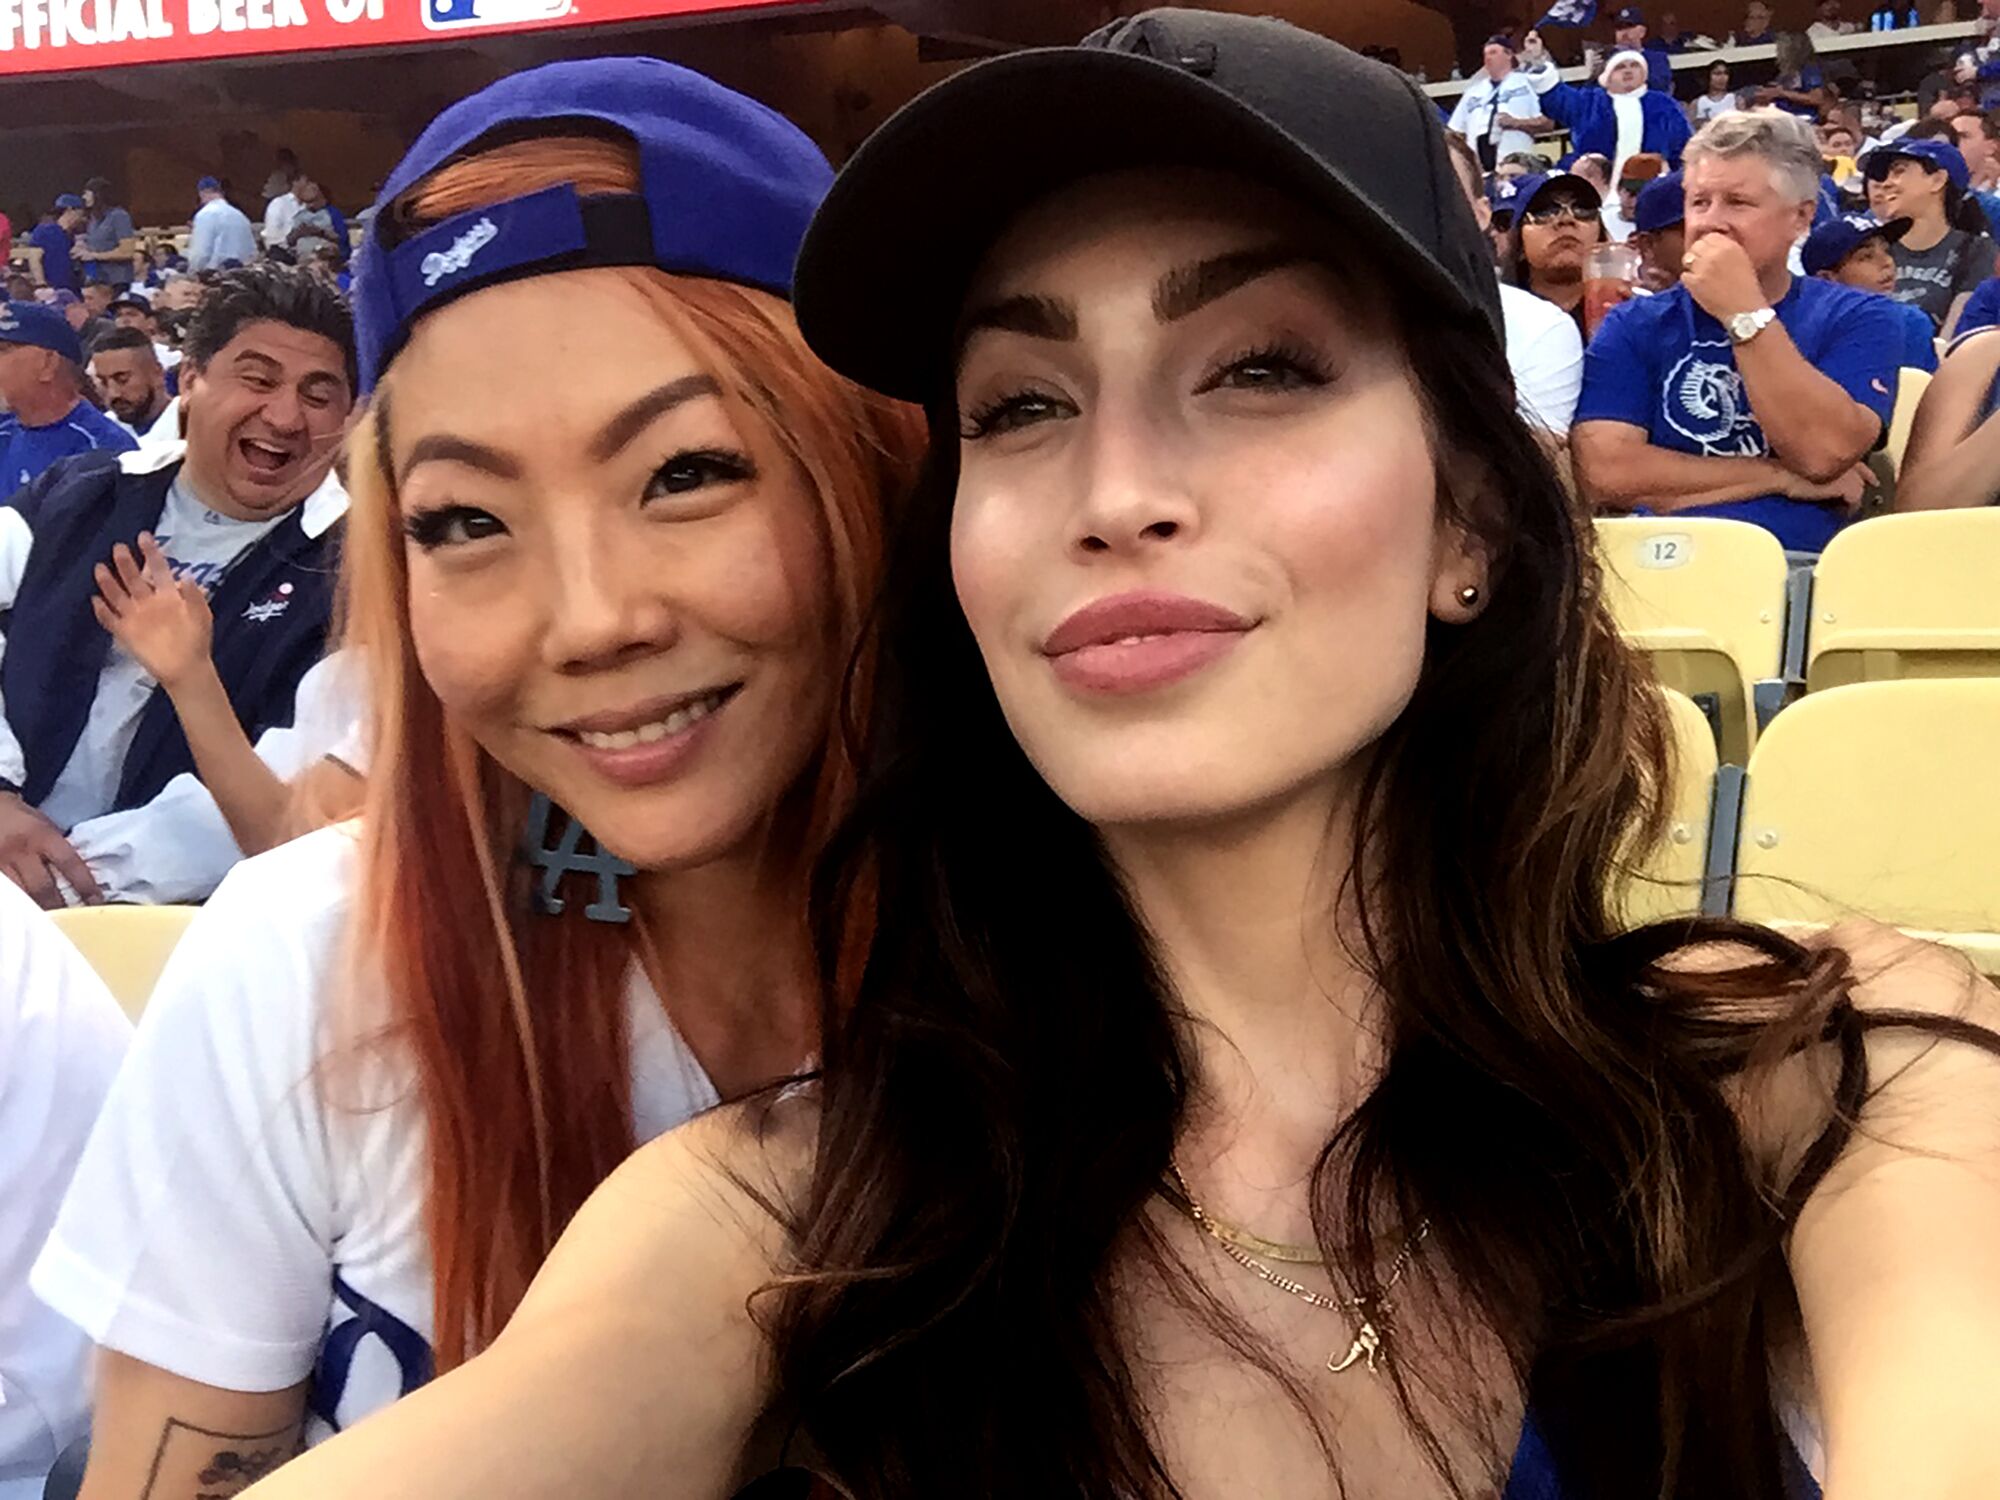 Yuni Kim and Stevie Ryan at a Dodgers game in 2016.